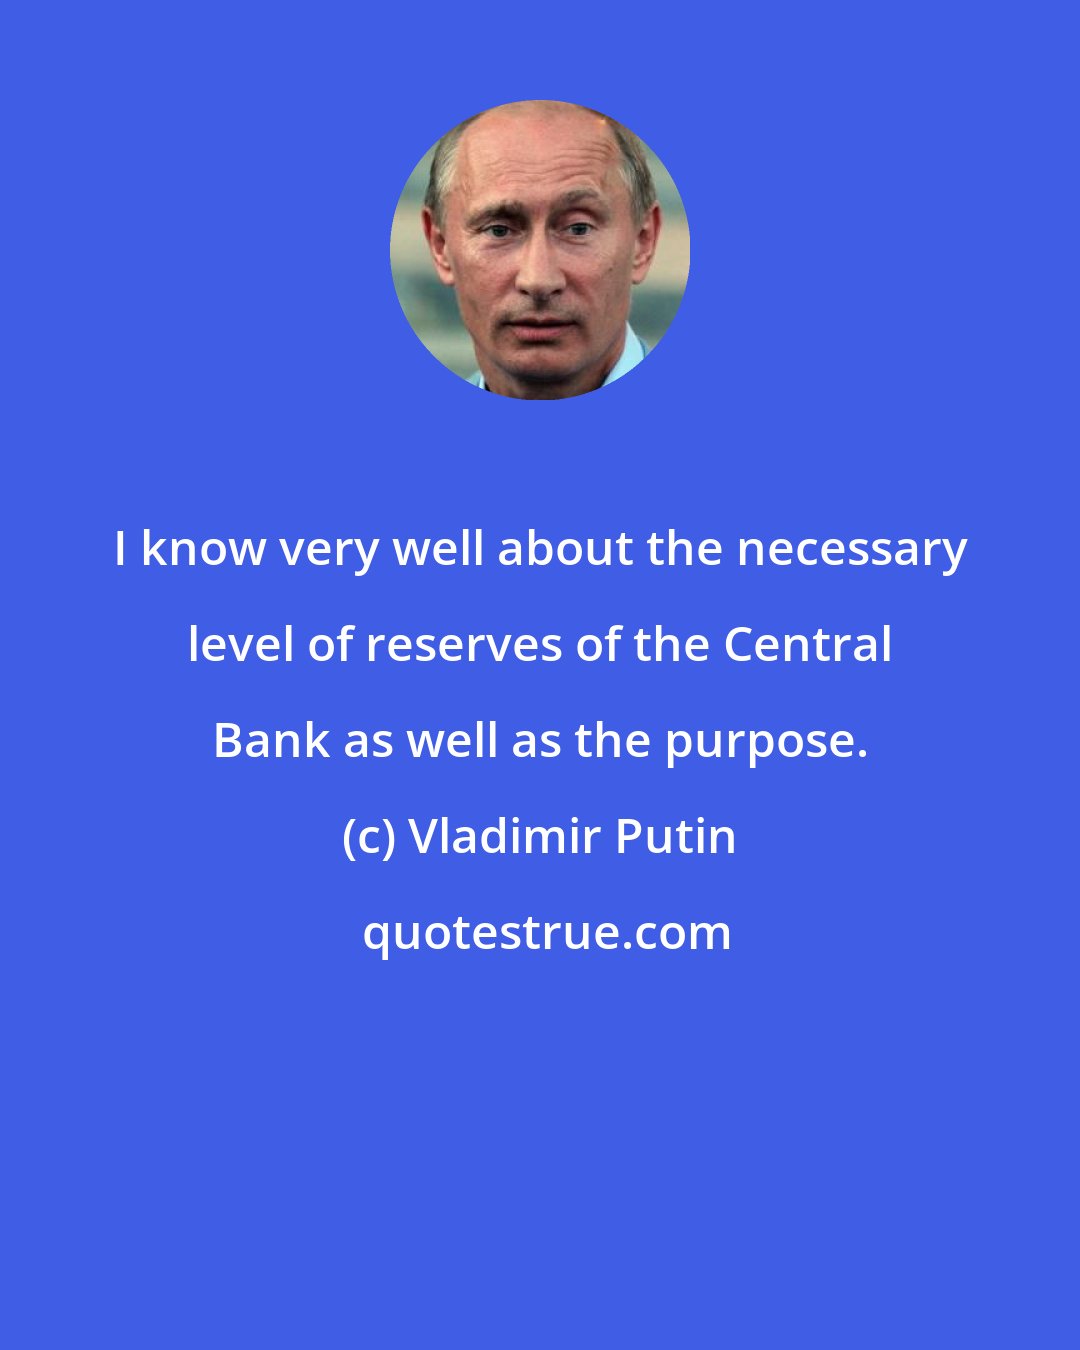 Vladimir Putin: I know very well about the necessary level of reserves of the Central Bank as well as the purpose.